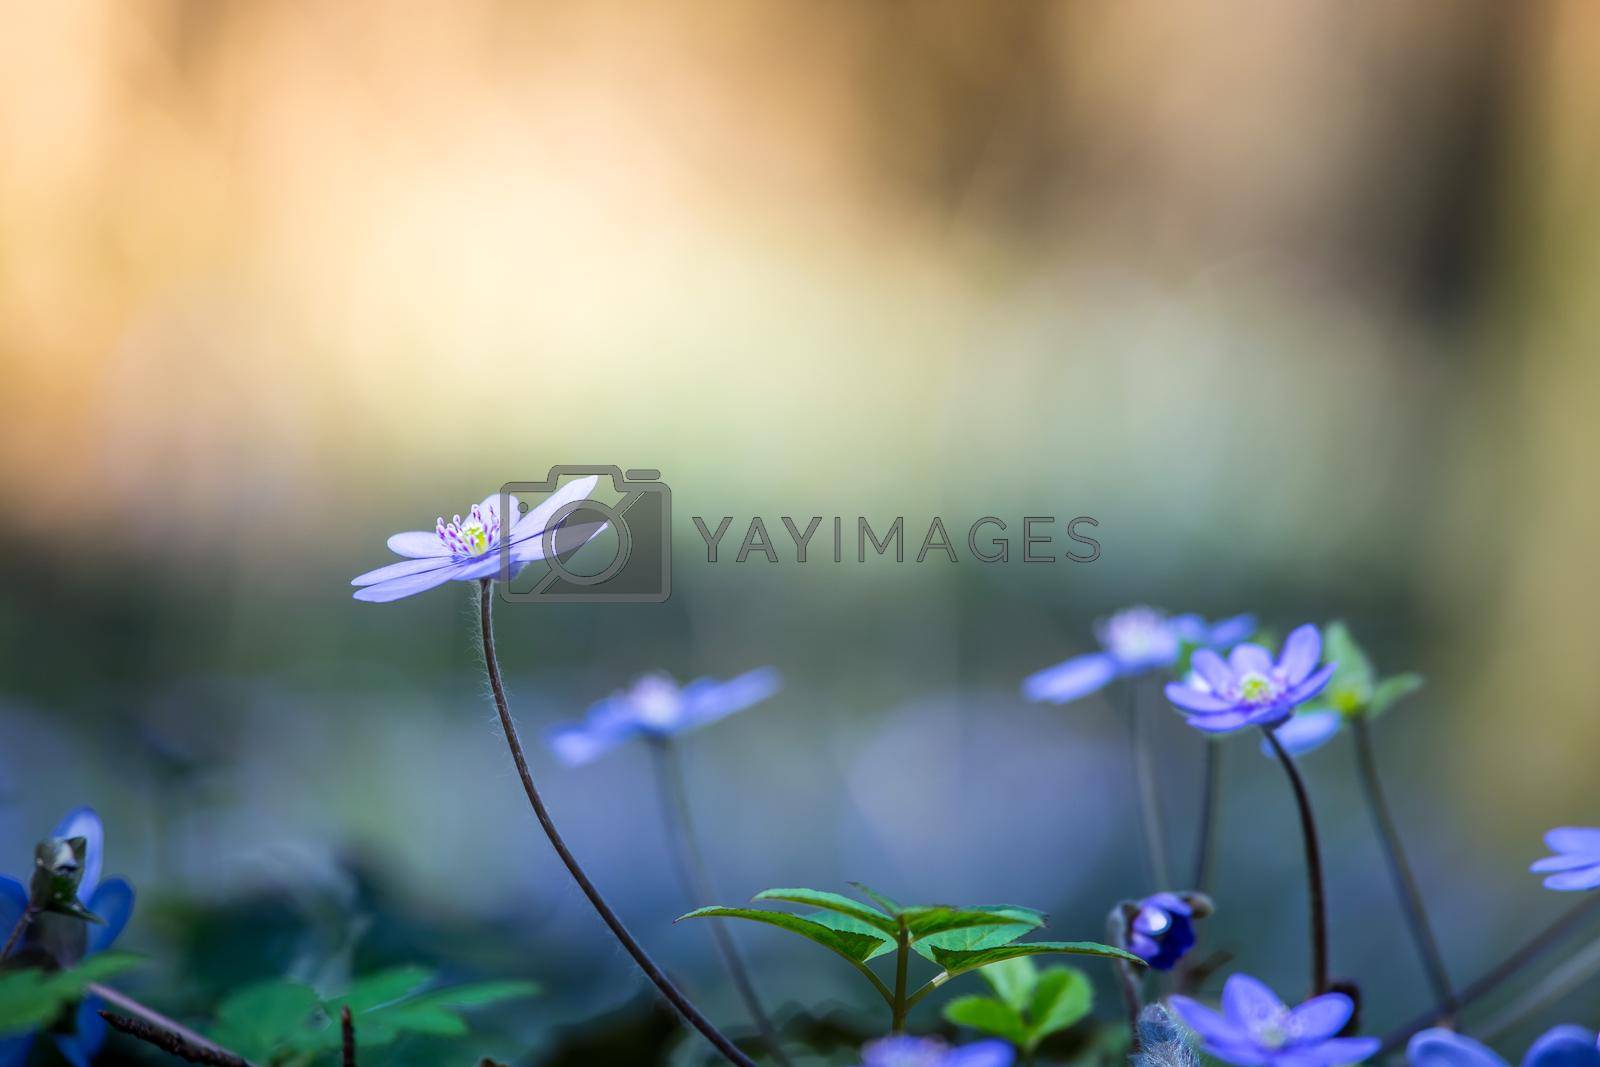 Royalty free image of Magic spring atmosphere: Close up of violet spring flowers, liverleaf or hepatica by Daxenbichler